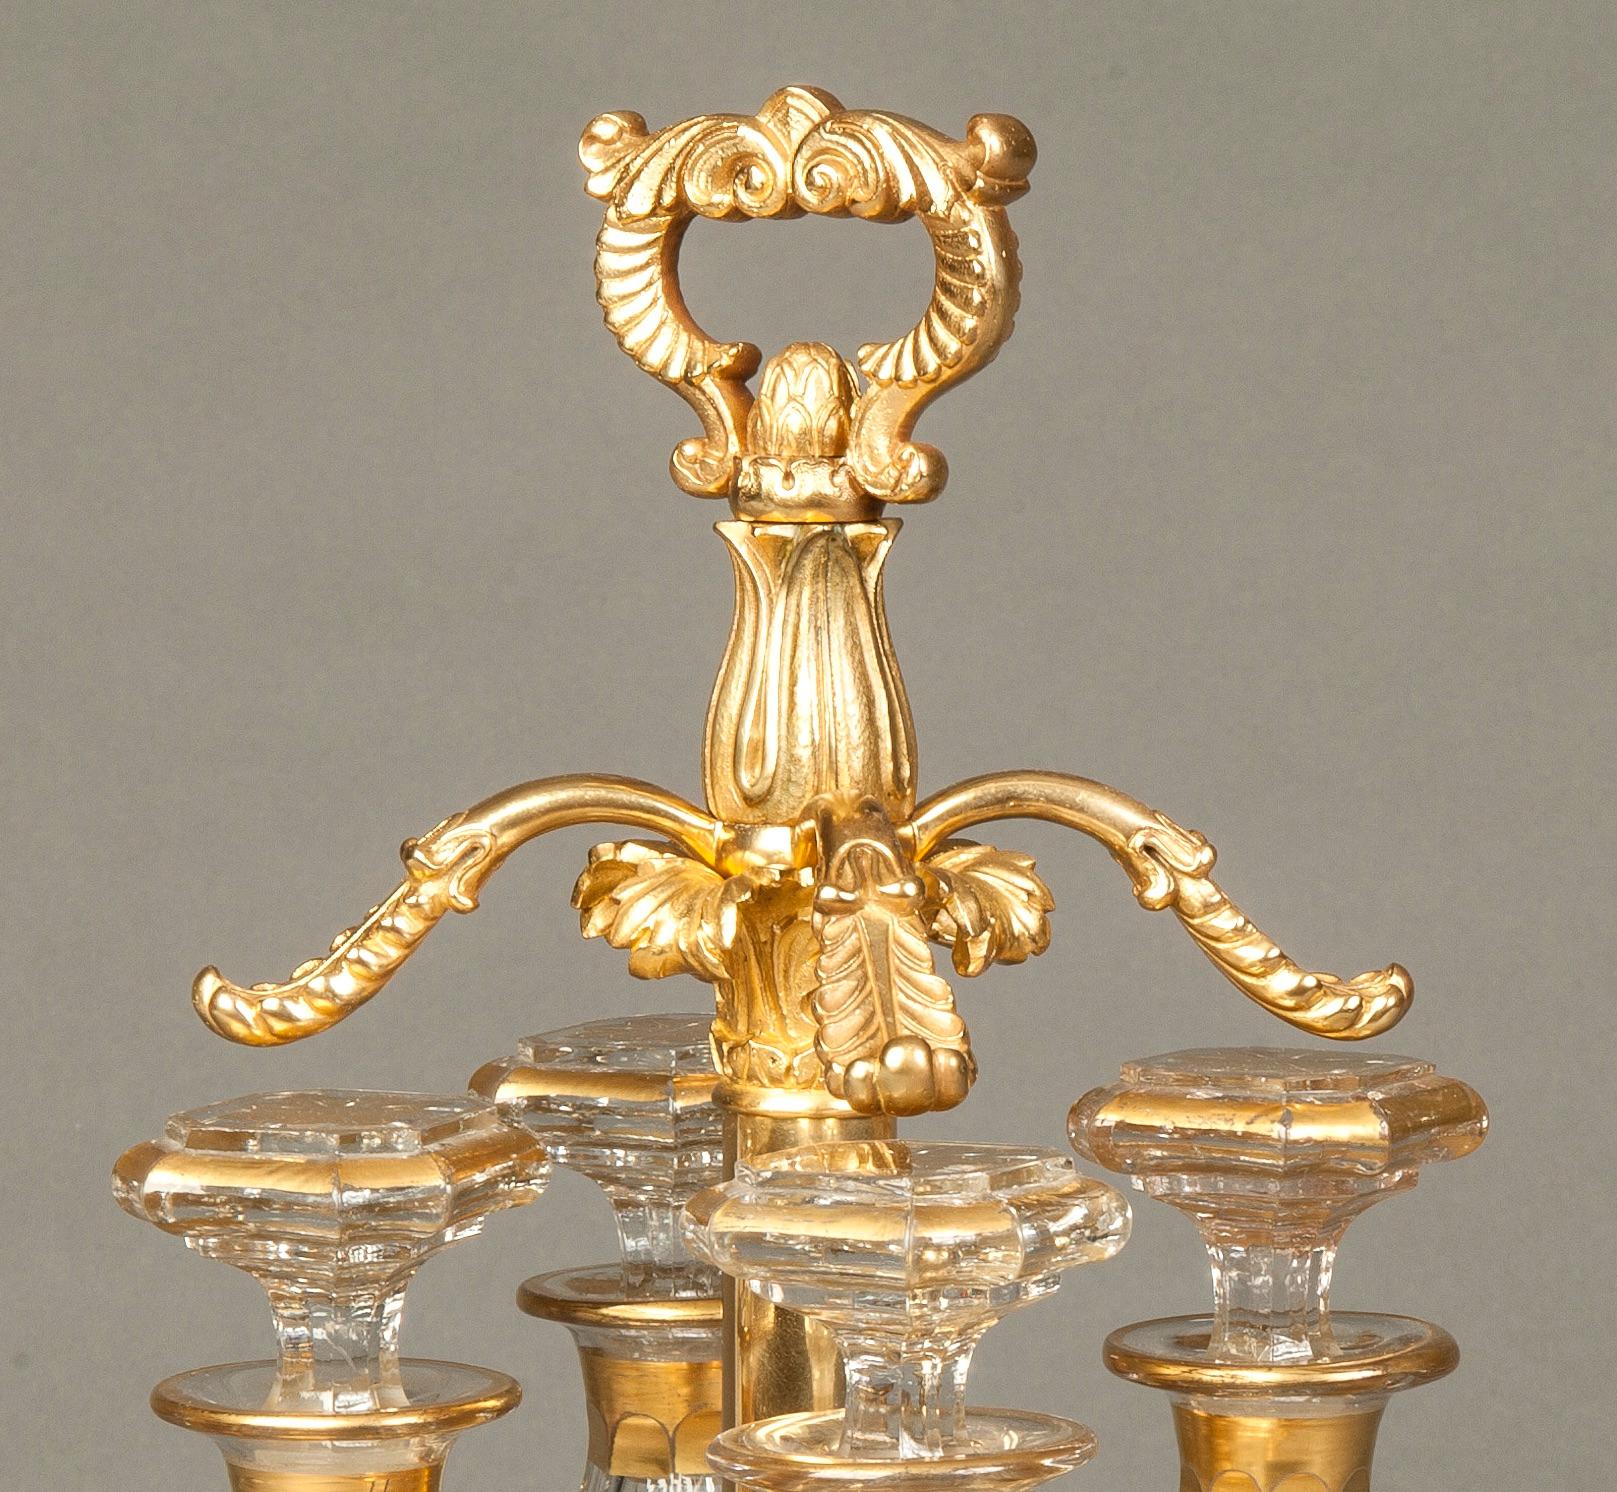 Napoleon III 19th Century French Ormolu and Crystal Drinks Set For Sale